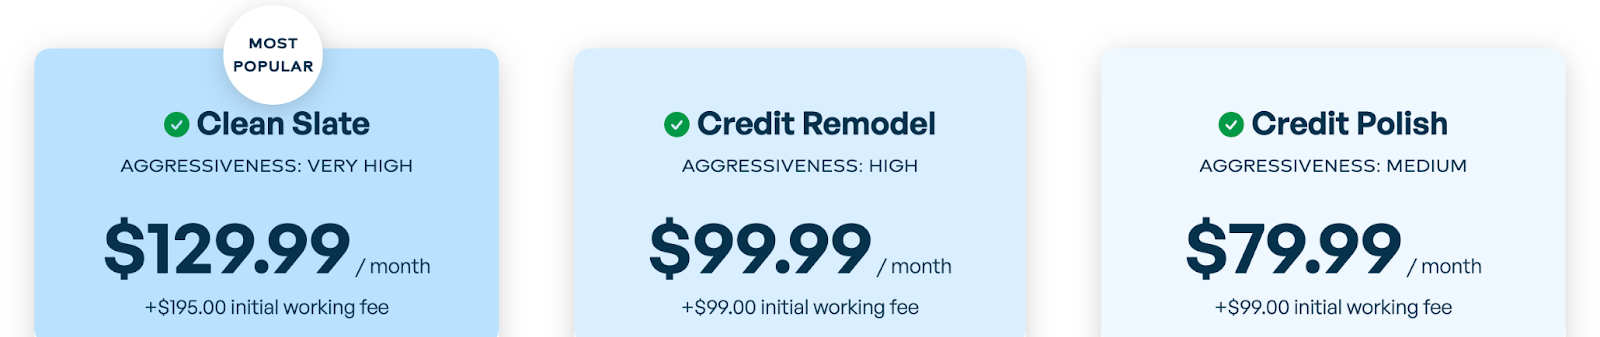 How Much Does Credit Saint Cost Per Month?